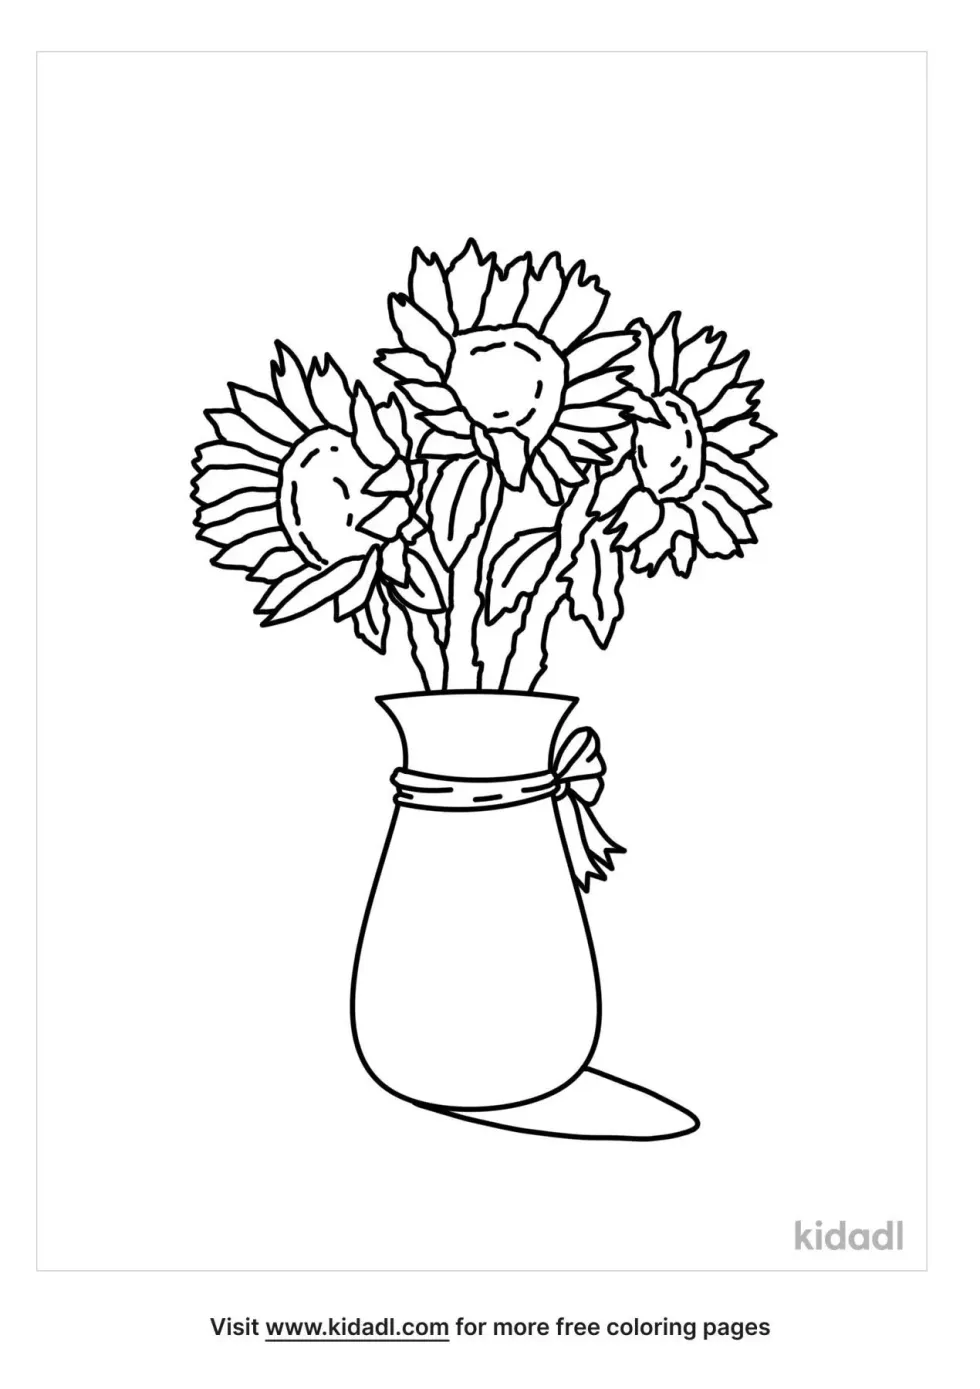 Sunflowers In A Vase Coloring Page